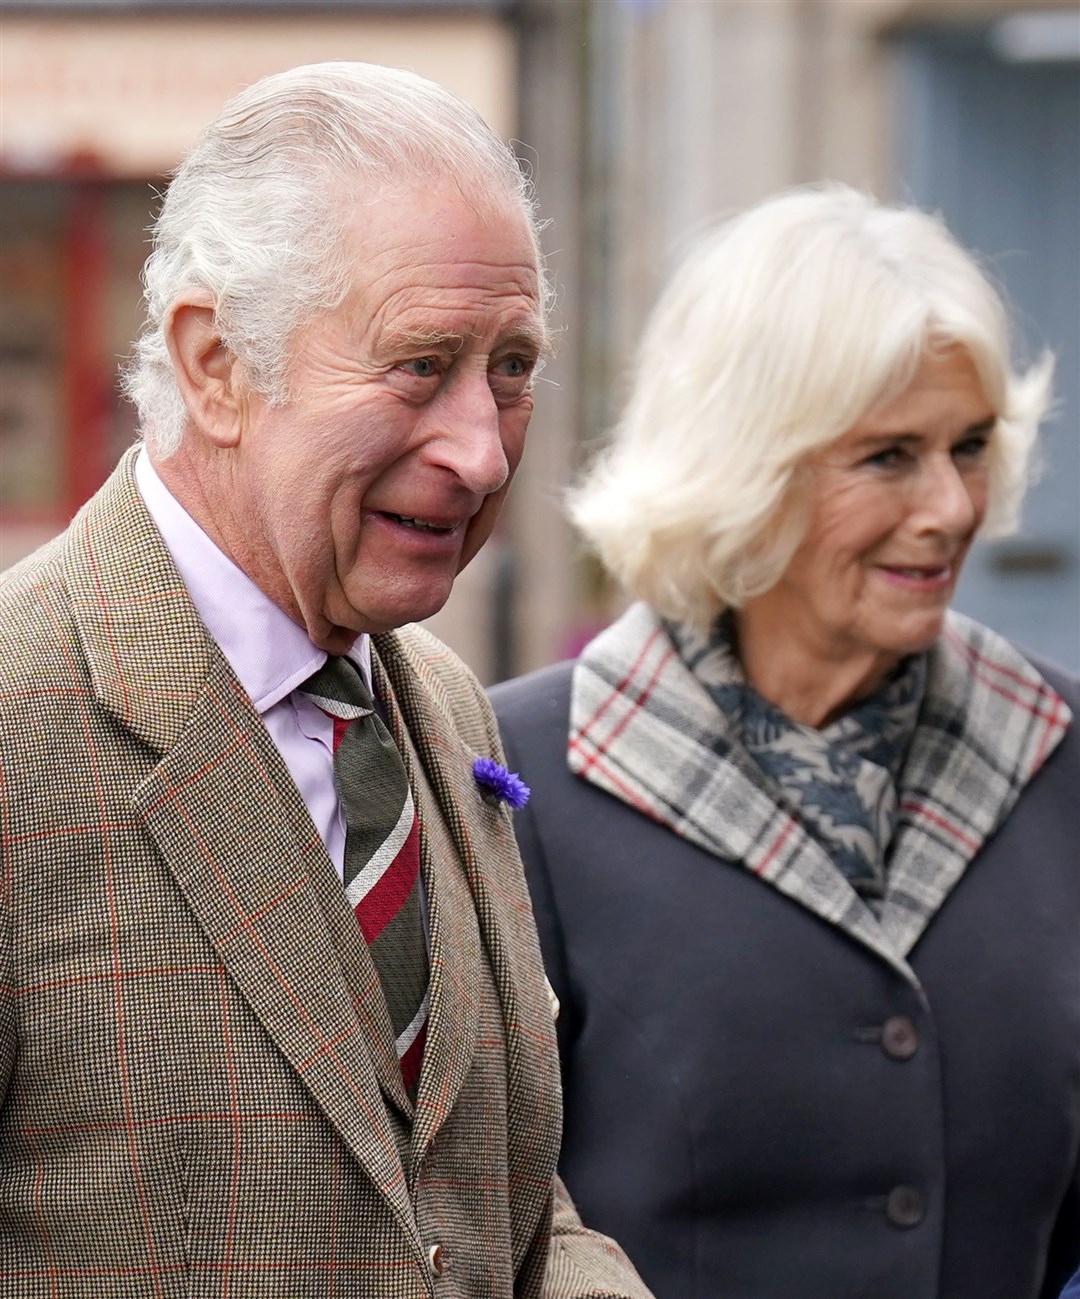 Camilla will be crowned Queen in May as part of the King’s coronation (Andrew Milligan/PA)